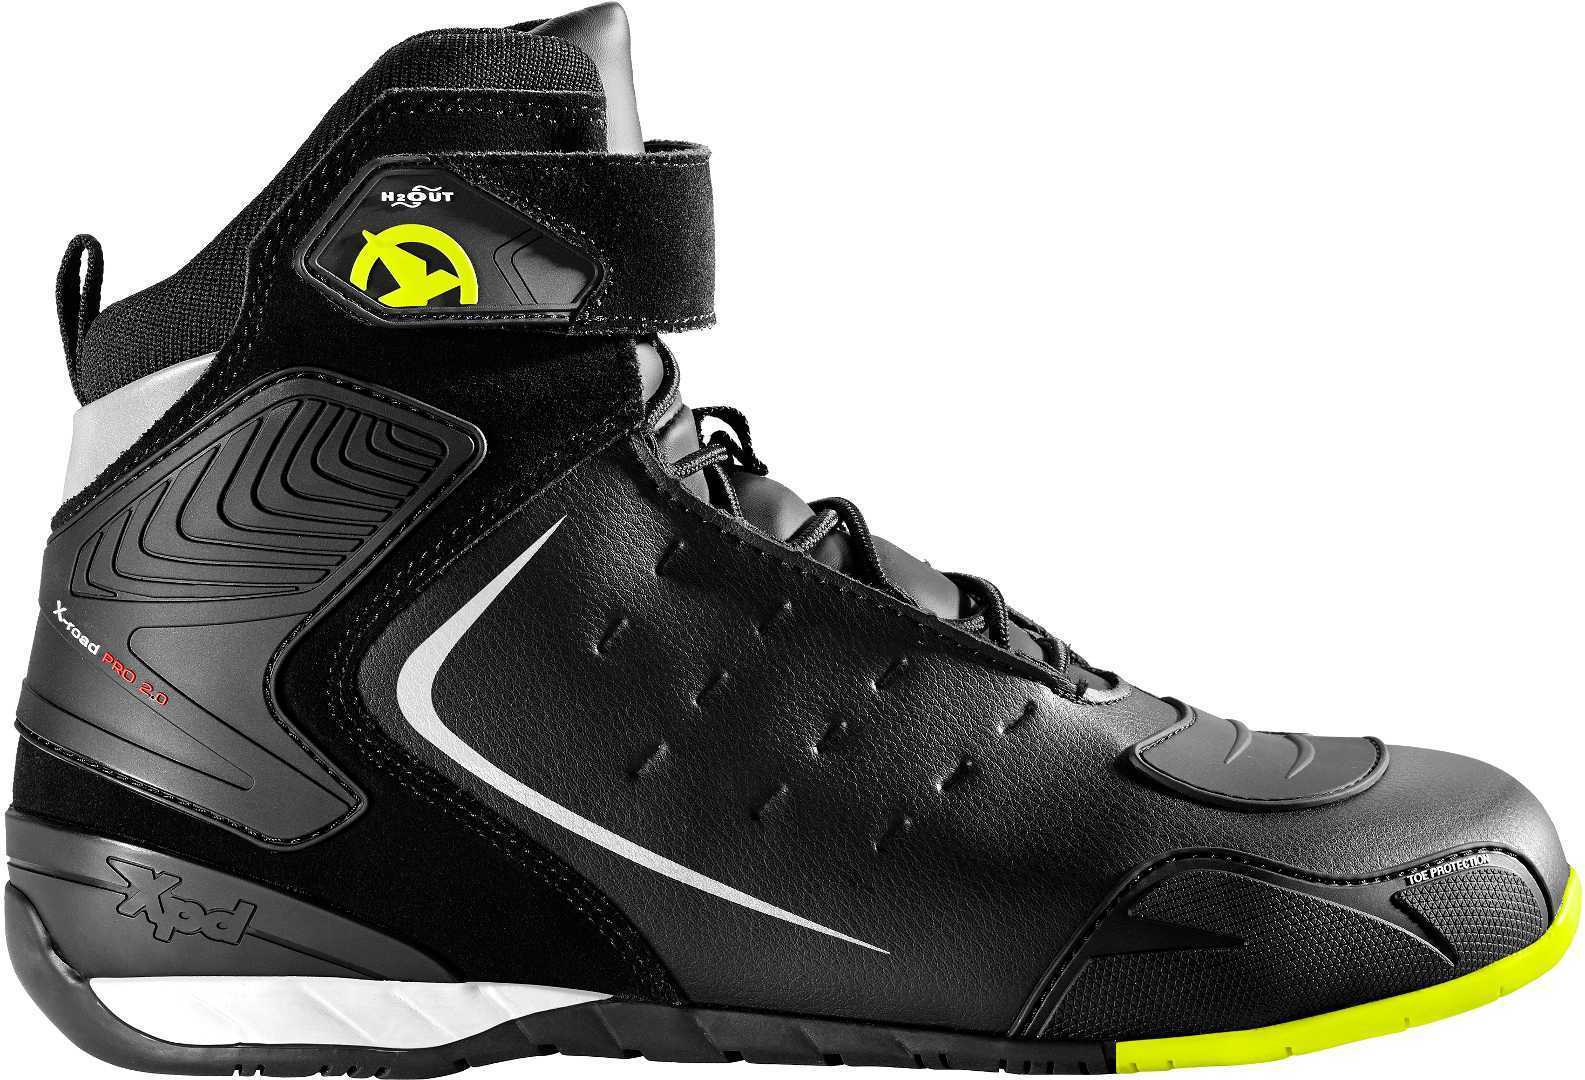 Image of XPD X-Road H2Out Yellow Fluo Talla 47